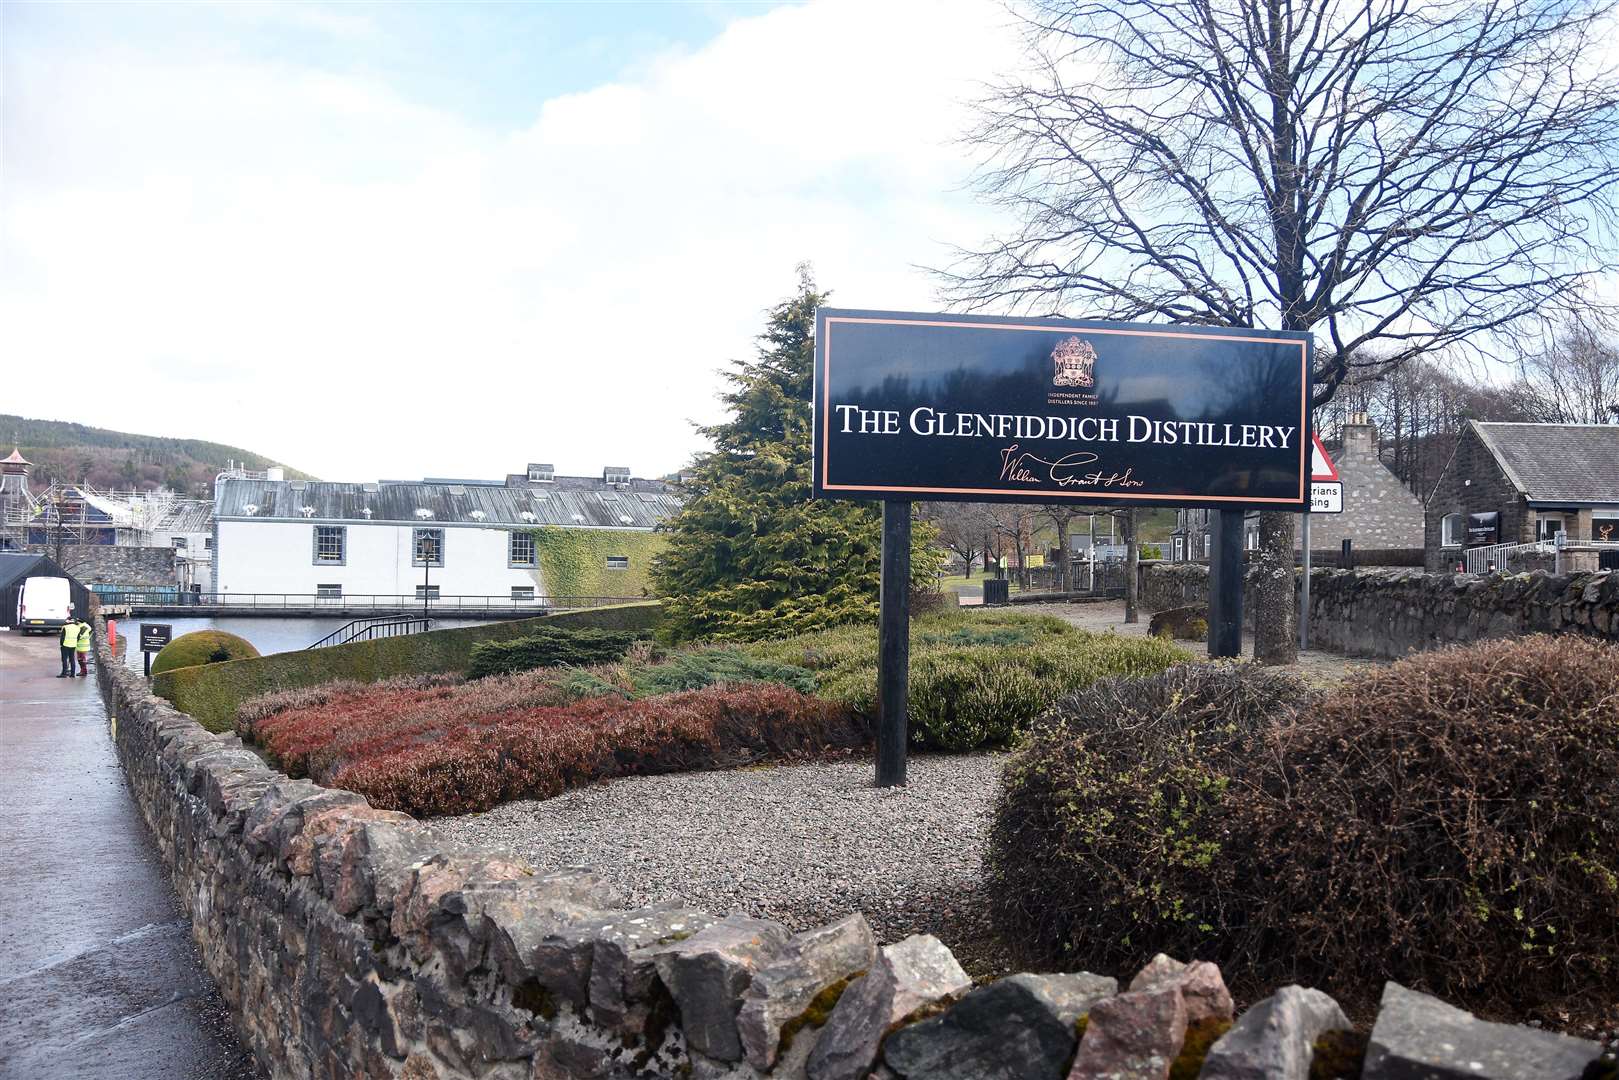 Glenfiddich Distillery will sell a limited edition whisky on whiskyauctioneer.com, from June 17-22, with all proceeds going to Moray Food Plus, Keirans Legacy and NHS Grampian. Picture: Becky Saunderson.